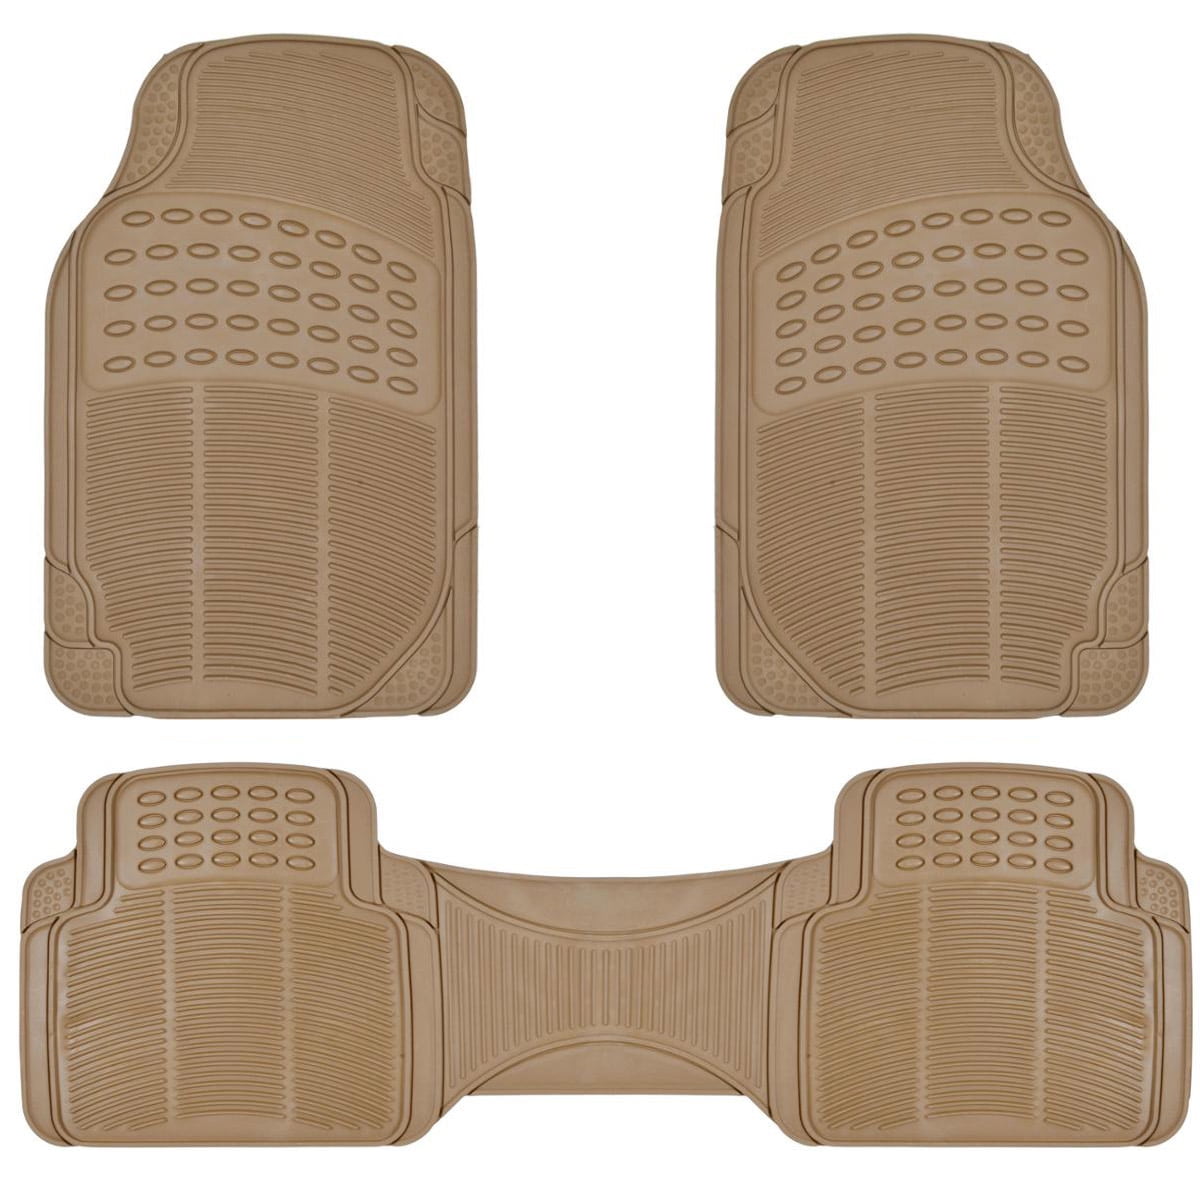 BDK 3 Pieces Heavy Duty Carpet Floor Mats for CAR SUV Van Light Beige Extra Thick Carpet with Rubber Backing Multiple Colors